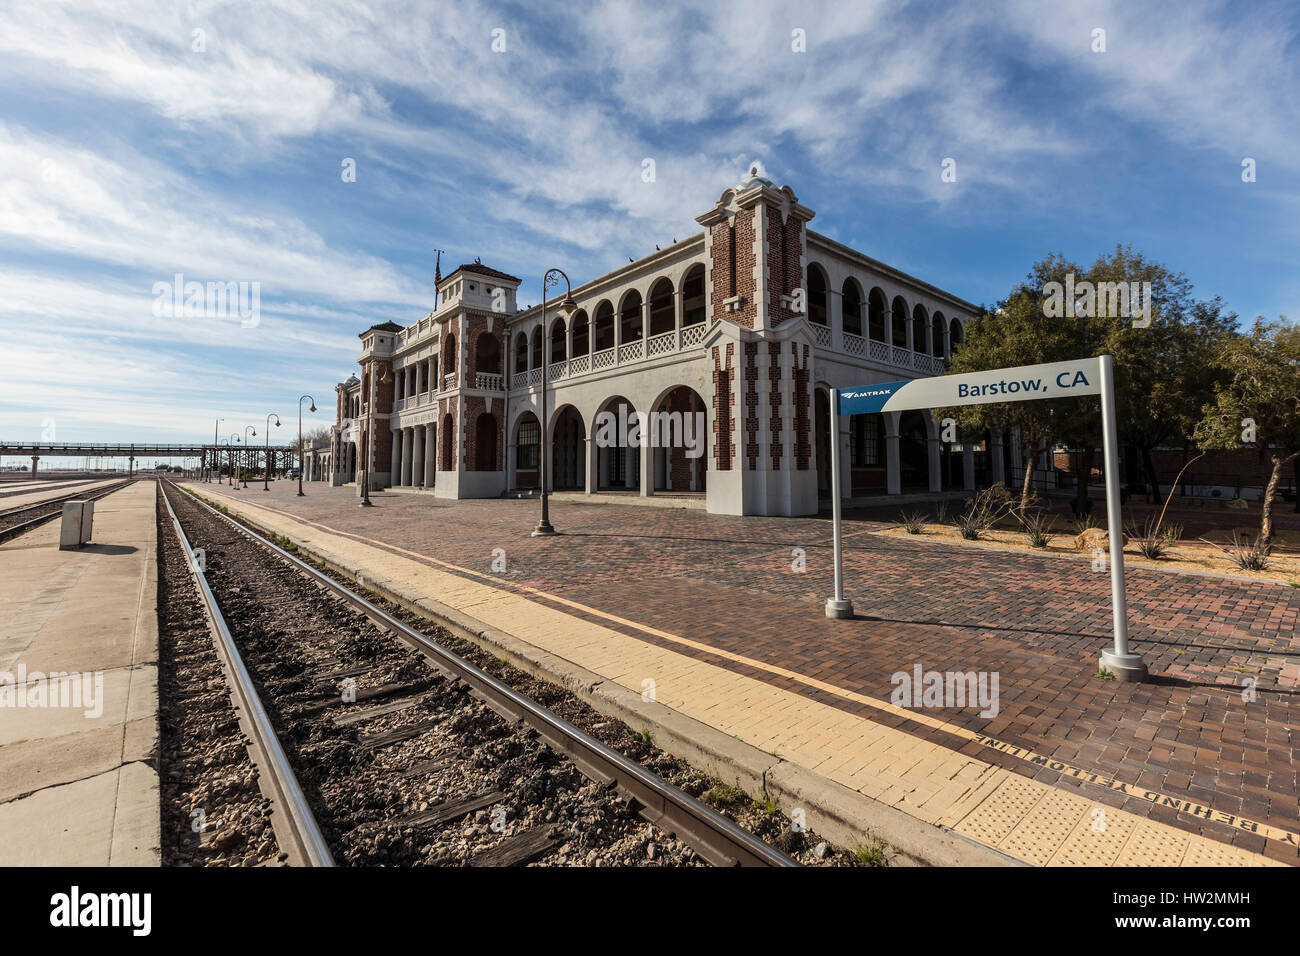 Barstow, California, USA - March 11, 2017:  Amtrak rail stop at the historic Barstow Harvey House train station in the Mojave Desert. Stock Photo